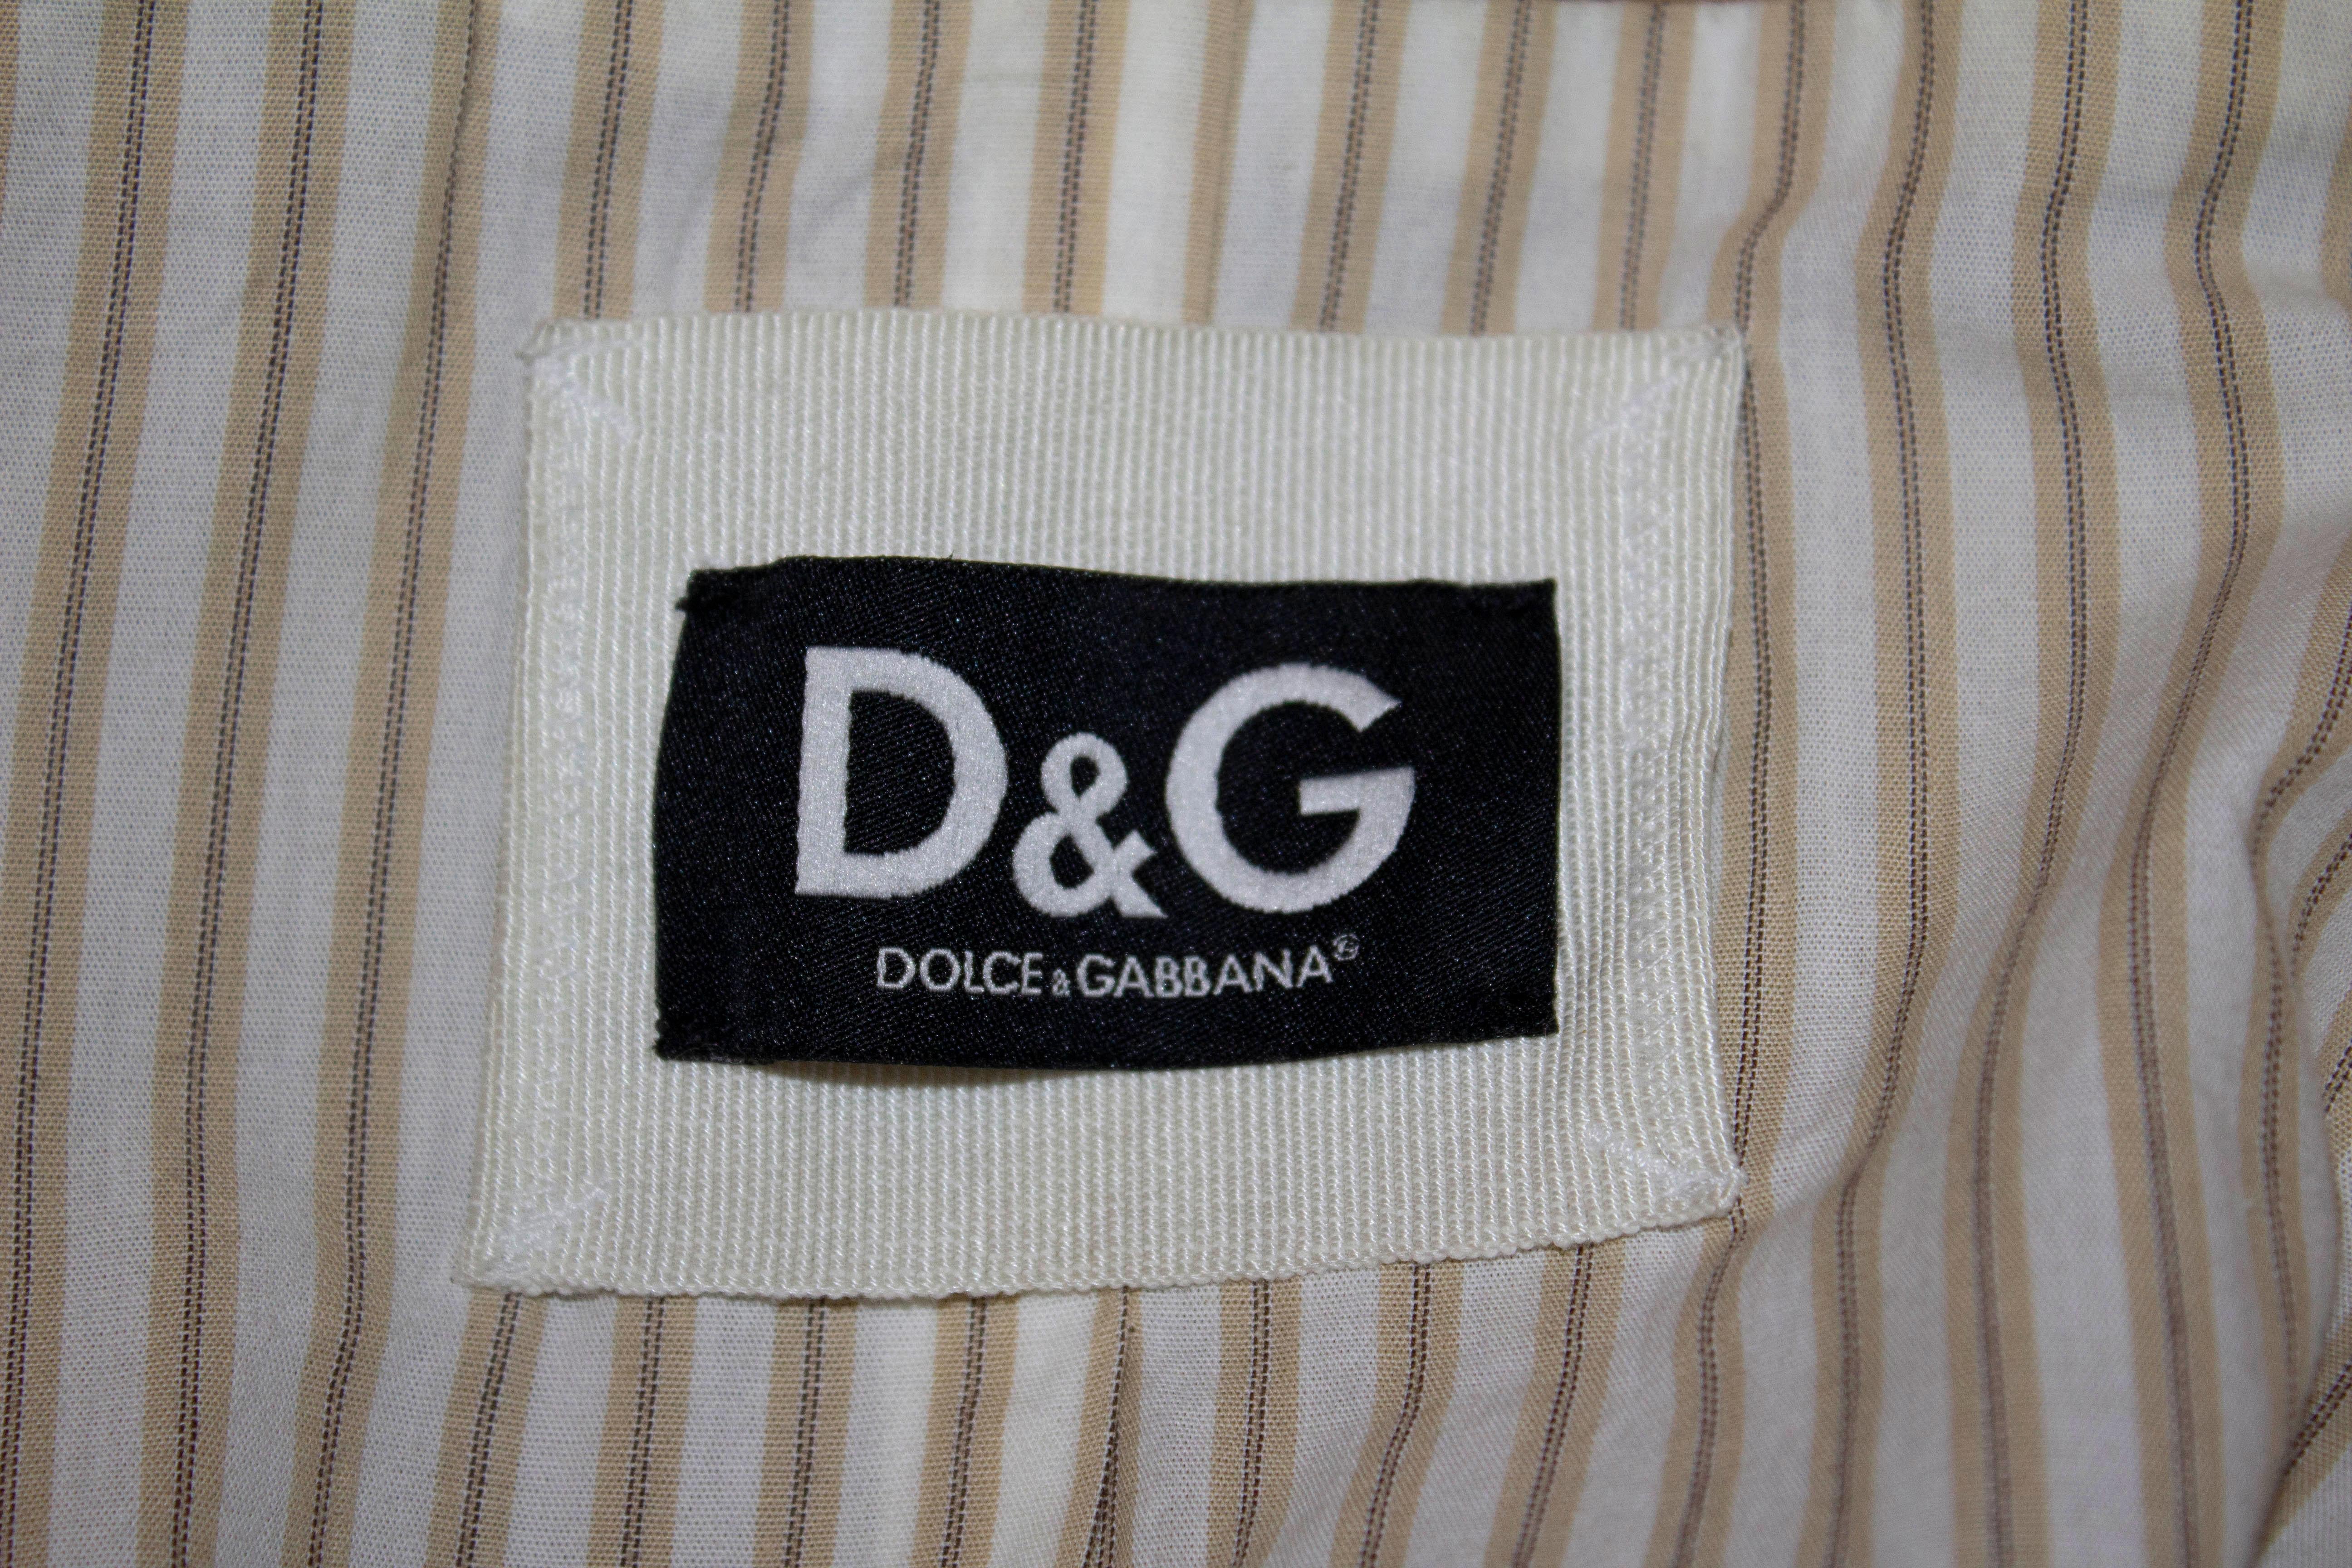 Dolce and Gabanna Raincoat In Good Condition For Sale In London, GB